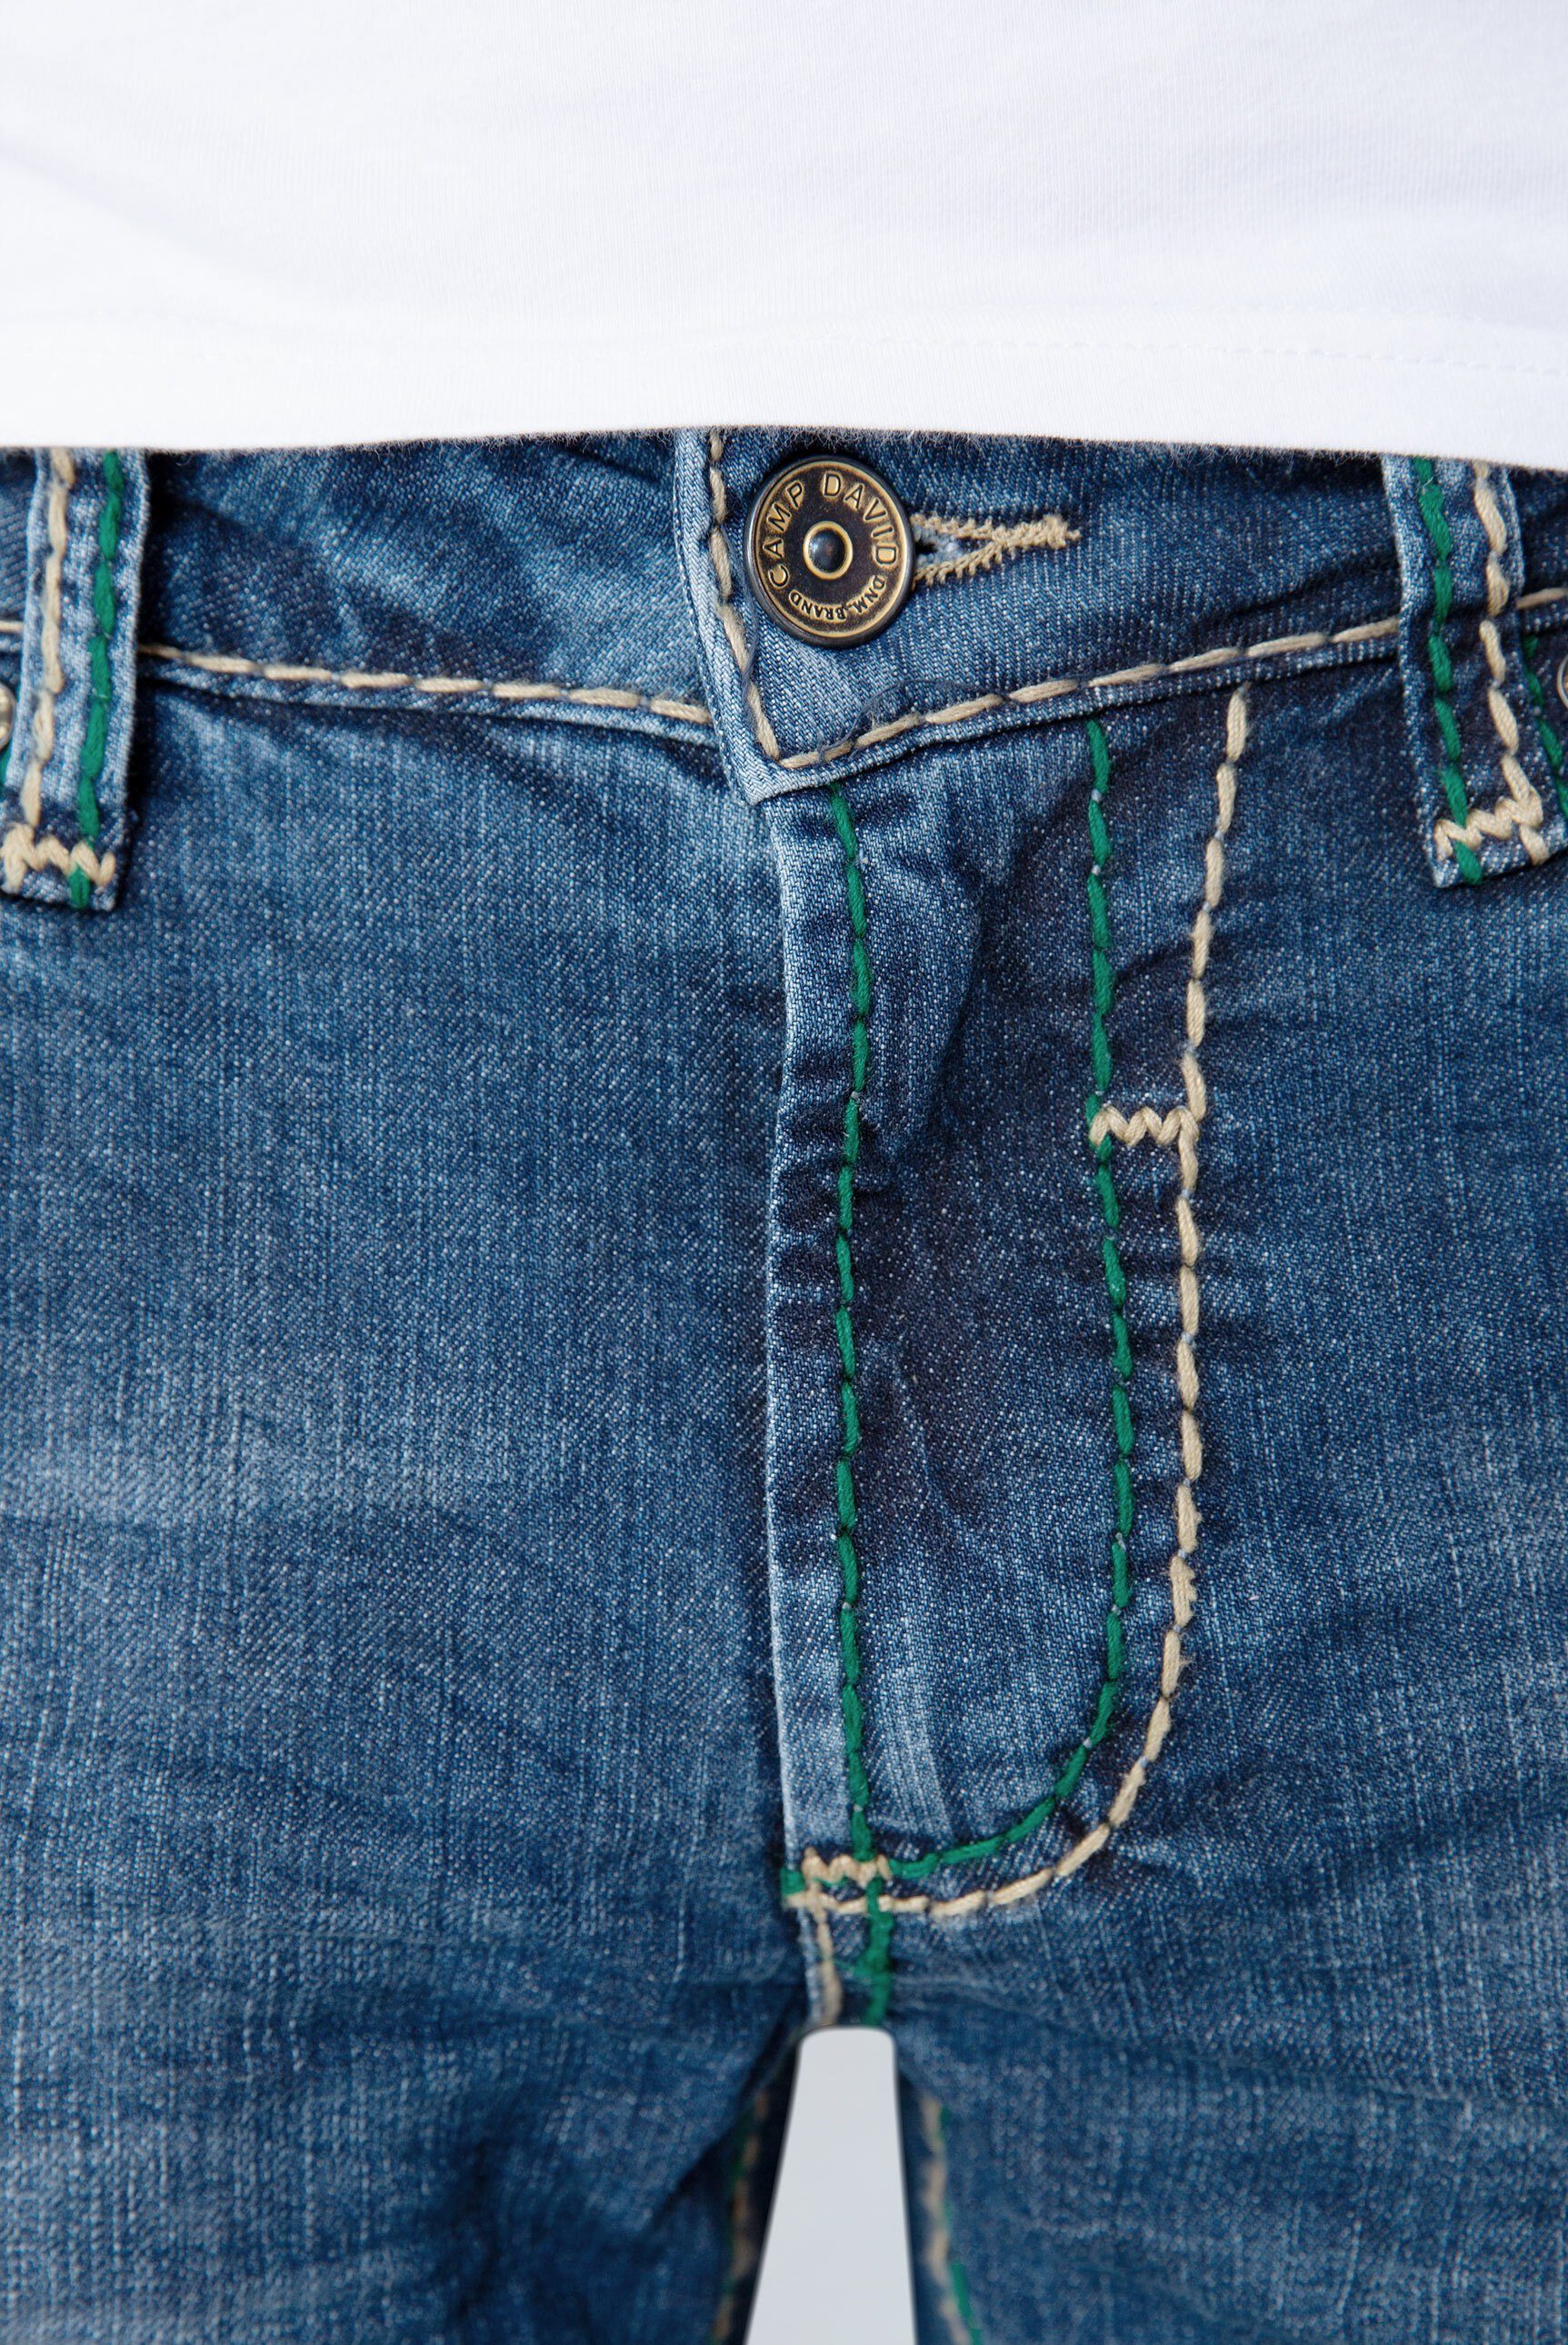 CAMP DAVID Regular-fit-Jeans NI:CO Used-Waschung mit